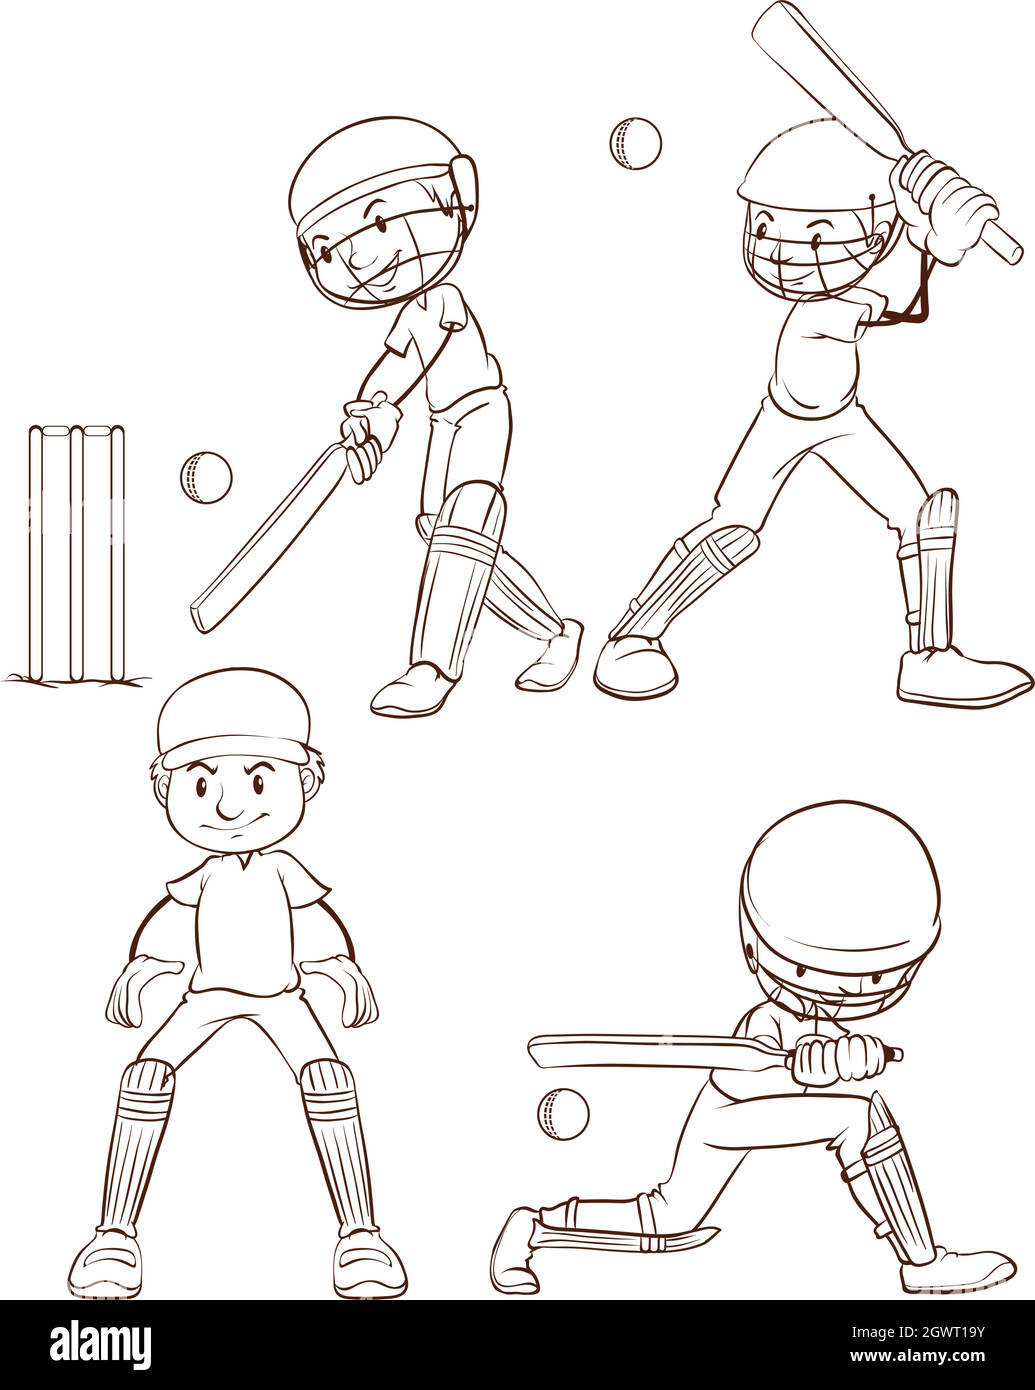 A simple sketch of the men playing cricket Stock Vector